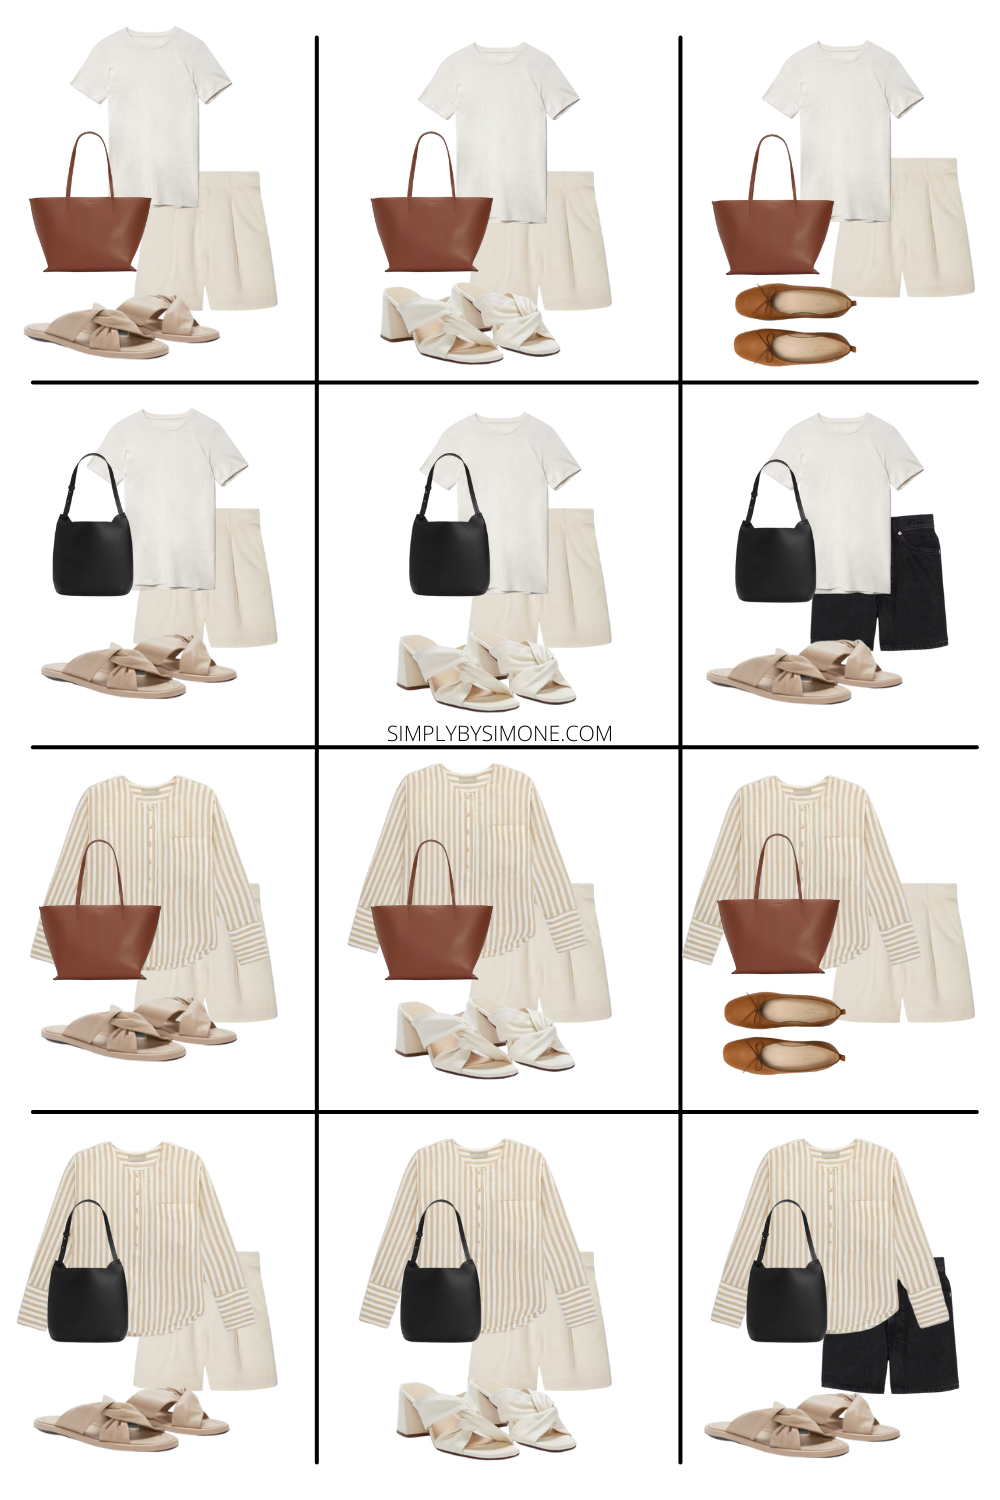 Affordable Everlane Summer Capsule Wardrobe | 12 Pieces, 48 Outfits | How to Build a Capsule Wardrobe | Everlane Summer Clothes | Outfit Inspiration | 48 Summer Weather Outfit Ideas | Summer Vacation Packing Guide | Everlane Summer Capsule Wardrobe - What To Wear This Summer 2023, European Outfit Ideas | Looks 1-12 | Simply by Simone